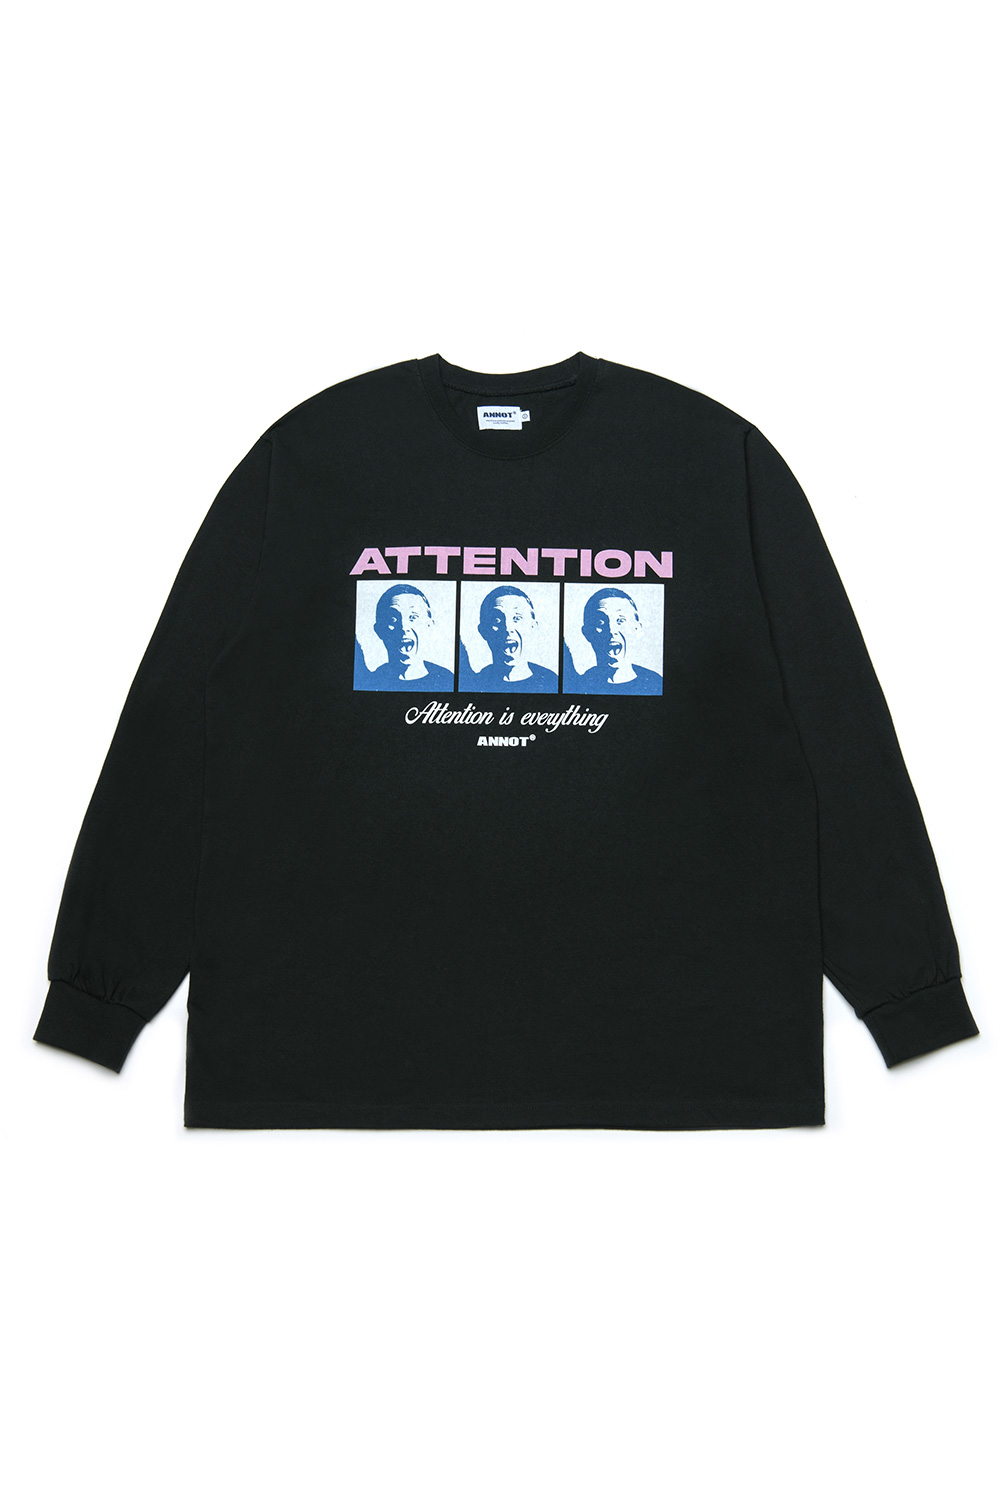 Attention Long Sleeve Black